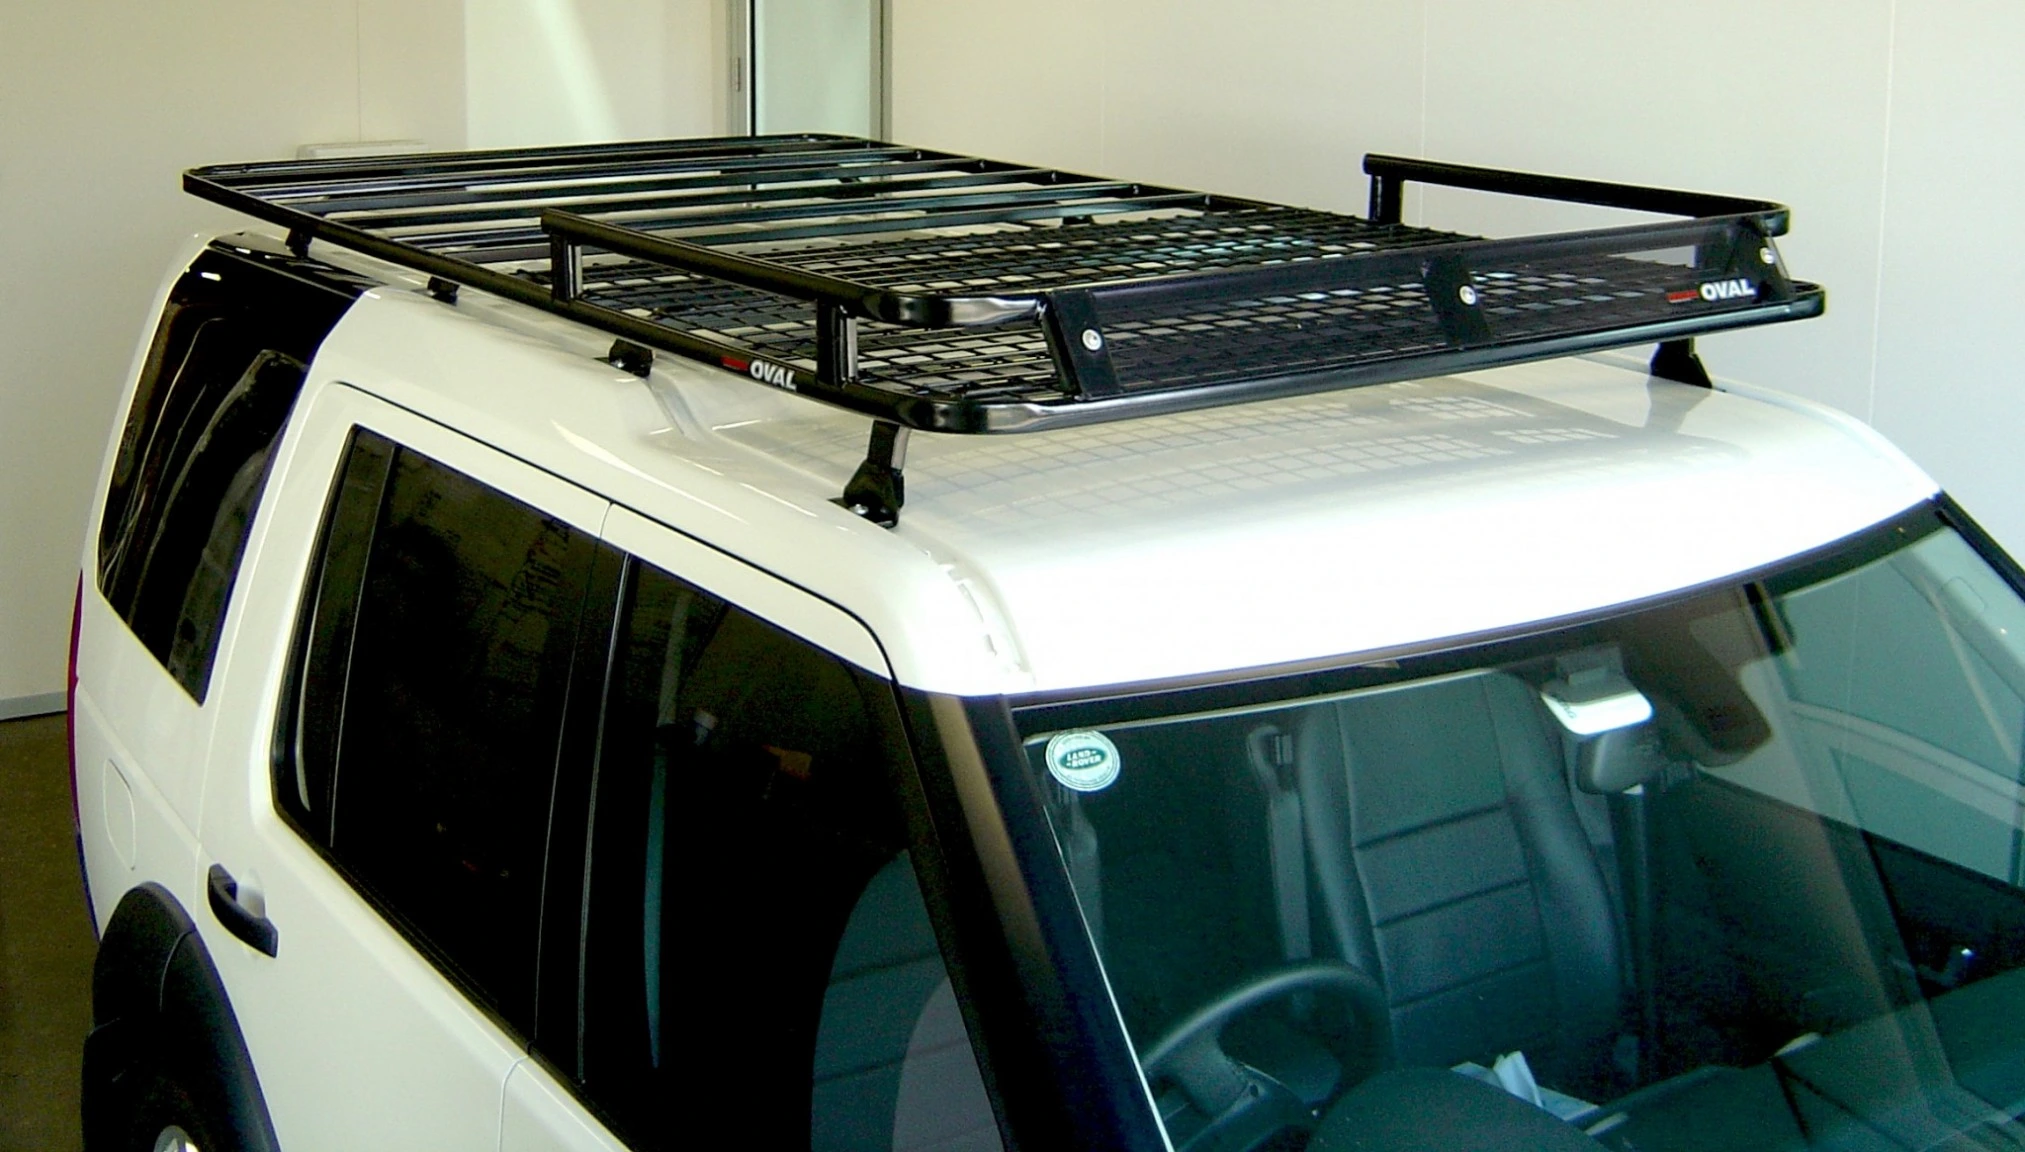 Oval-Alloy-tent-style-roof-racks-provide-space-for-a-roof-top-tent-and-storage